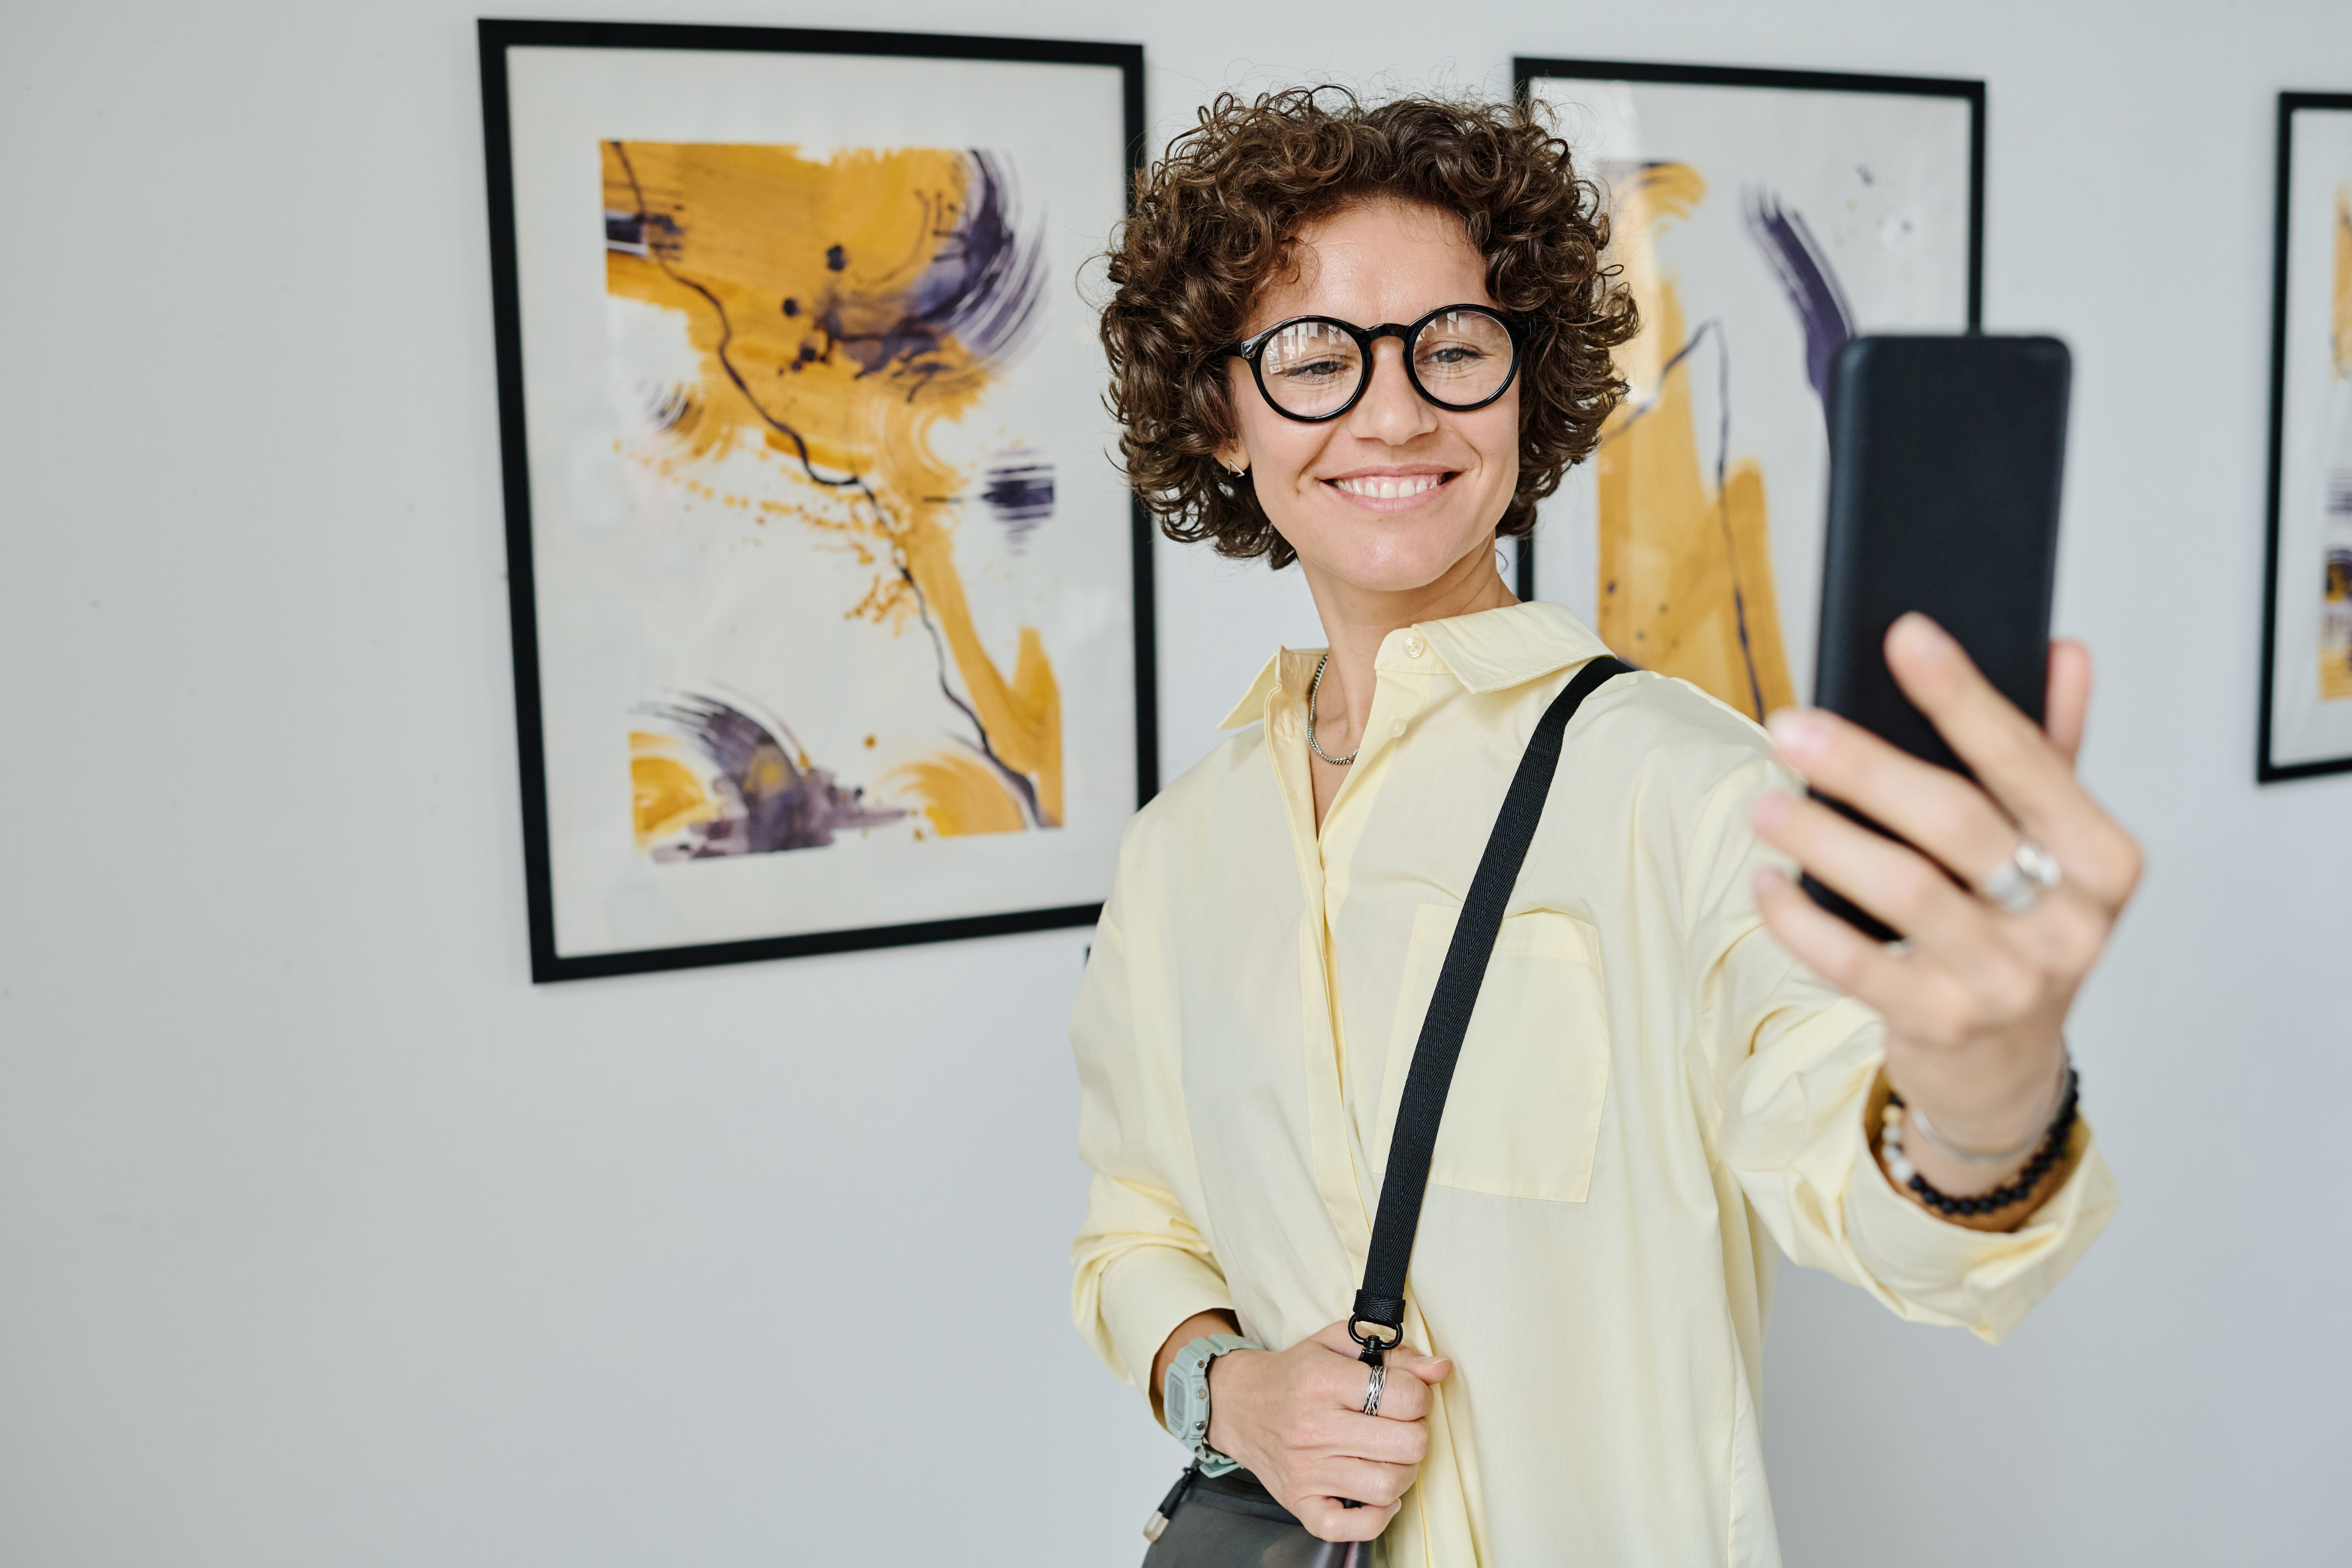 a photograph of a person taking a selfie in front of an art exhibit